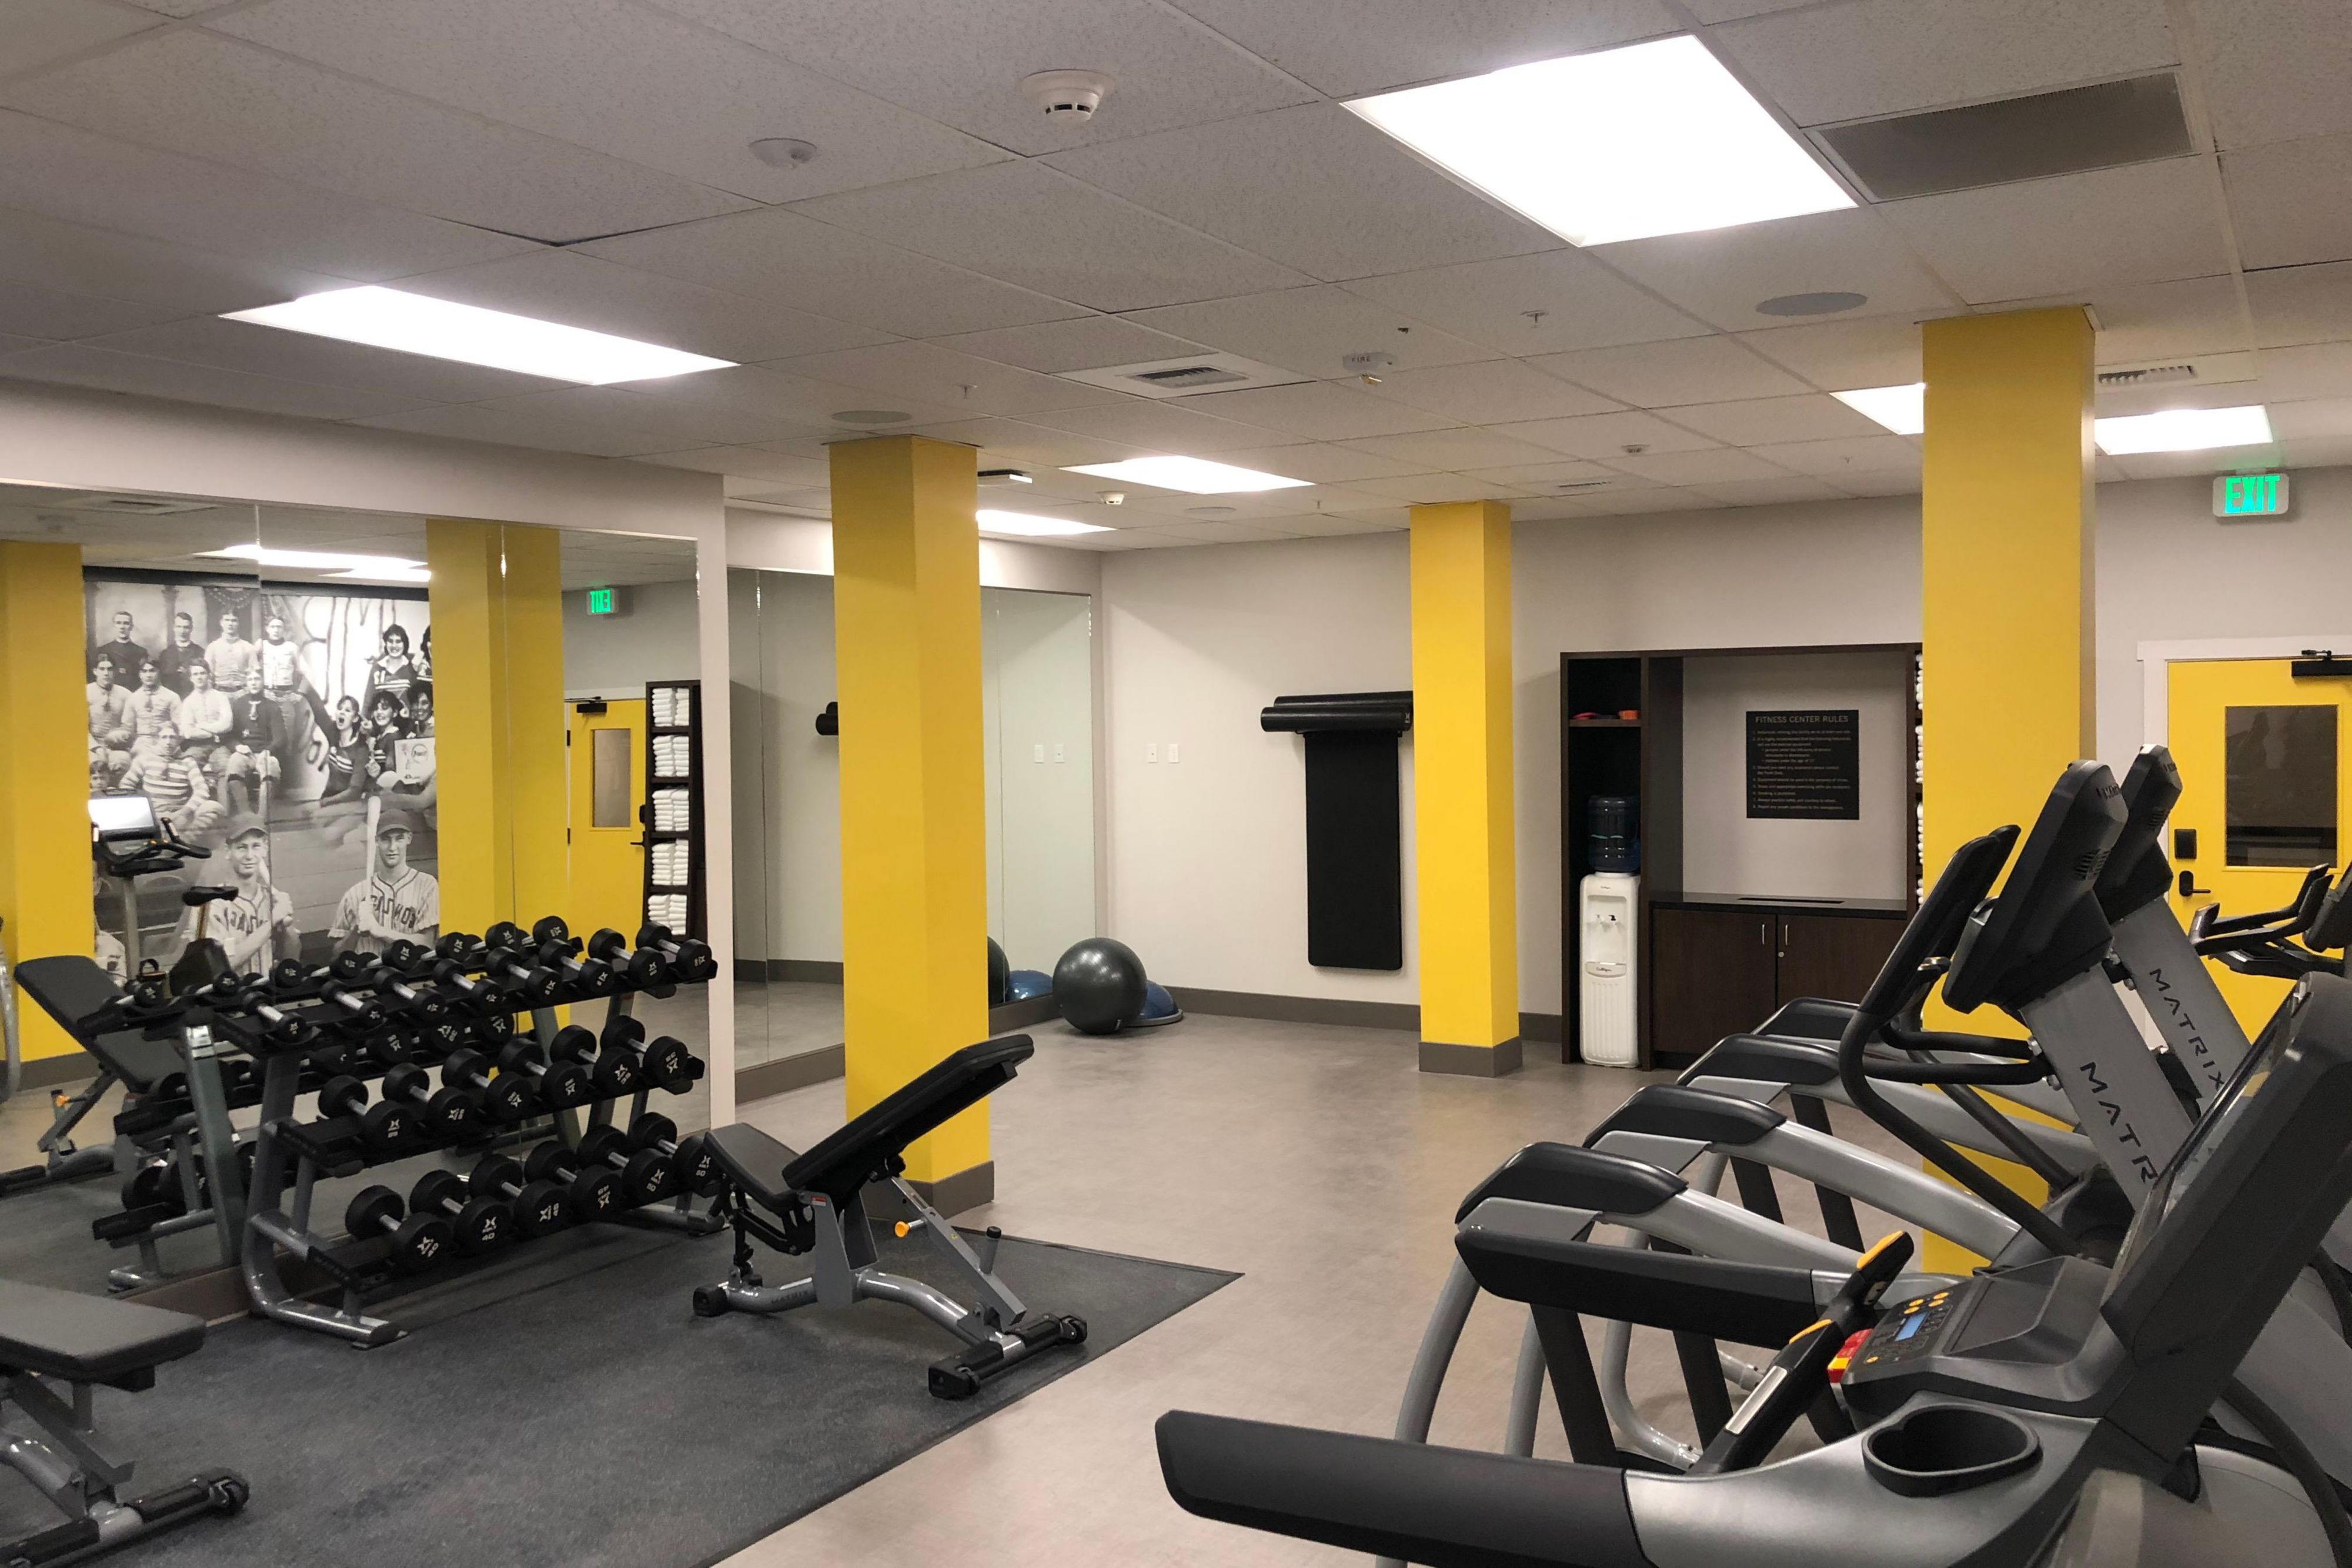 Stay committed to your fitness routine with our round-the-clock fitness center. Our well-equipped facility features everything you need, from treadmills and ellipticals to free weights and balance balls. Enjoy complimentary water and fresh towels for a hassle-free fitness experience.